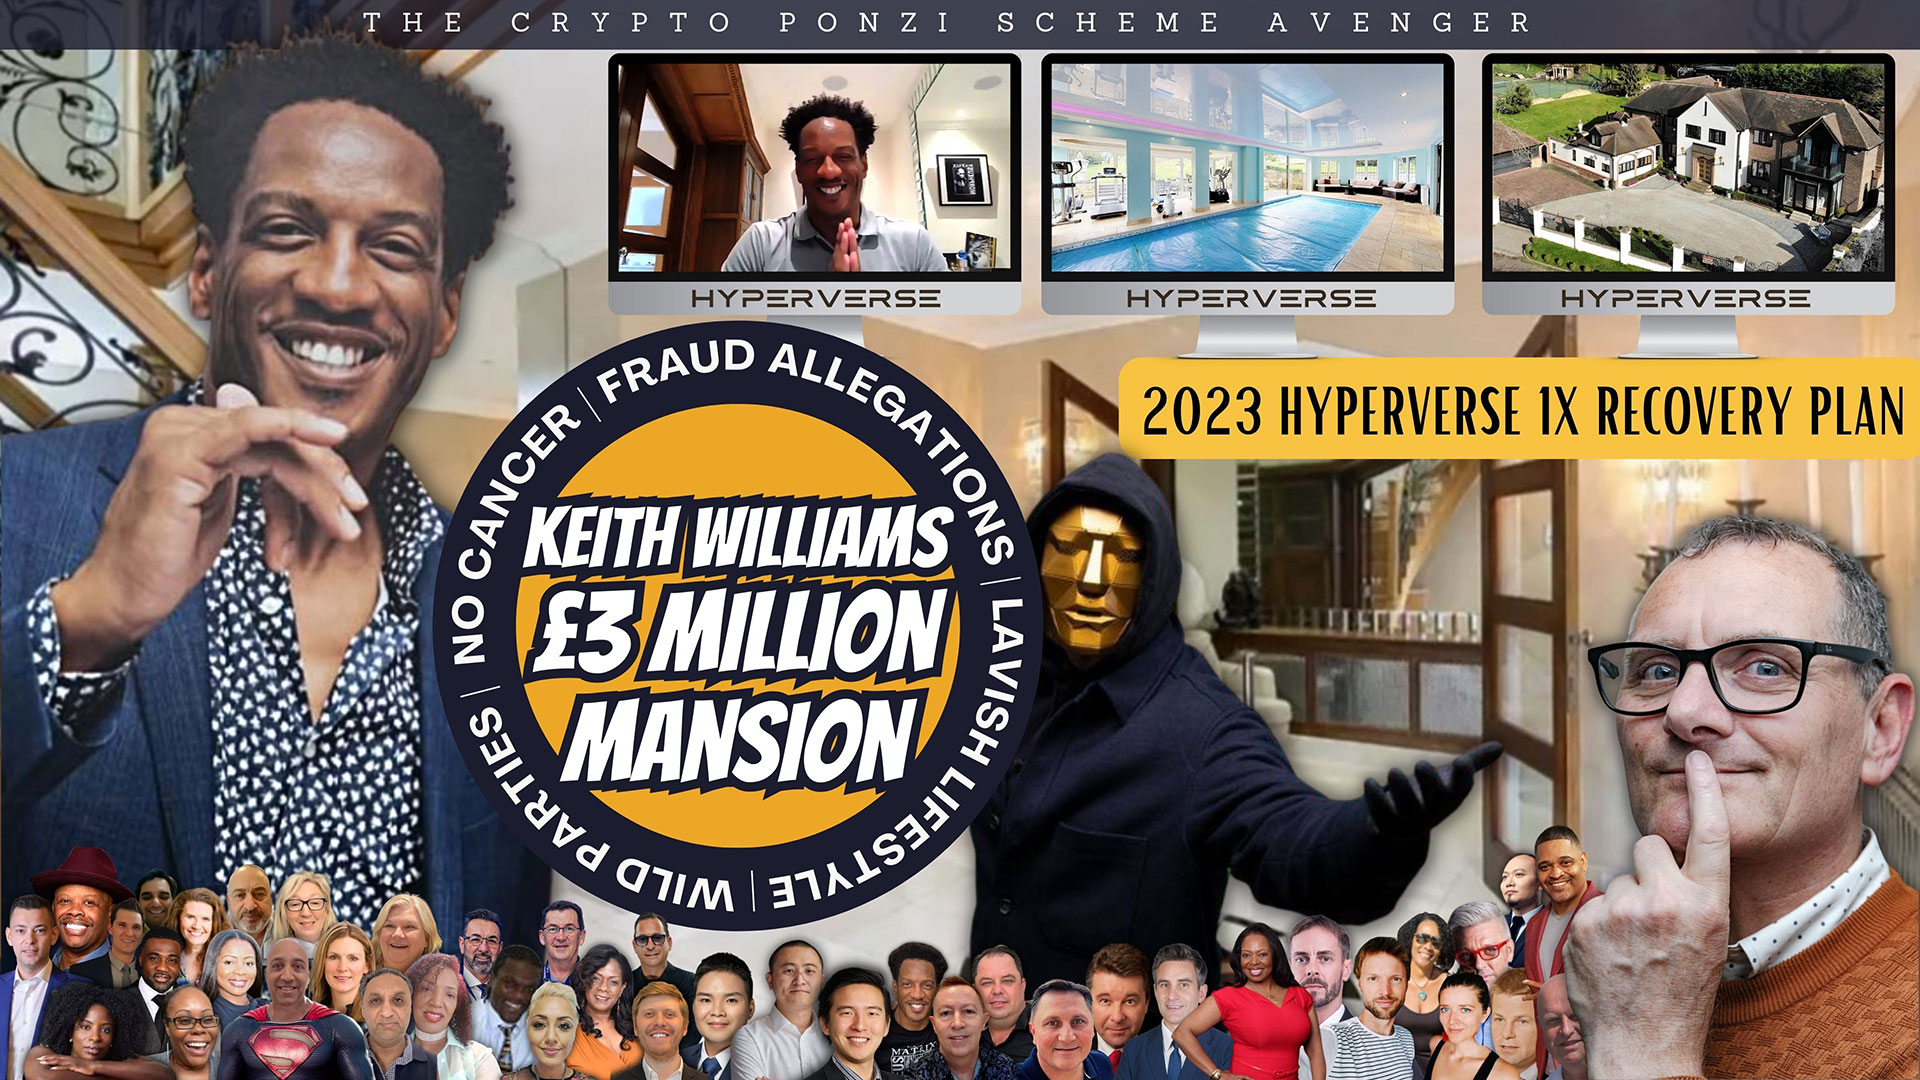 Keith Williams £3 Million Mansion NO CANCER FRAUD ALLEGATIONS LAVISH LIFESTYLE WILD PARTIES Entrepreneur Decision Maker Connector Podcaster Educator